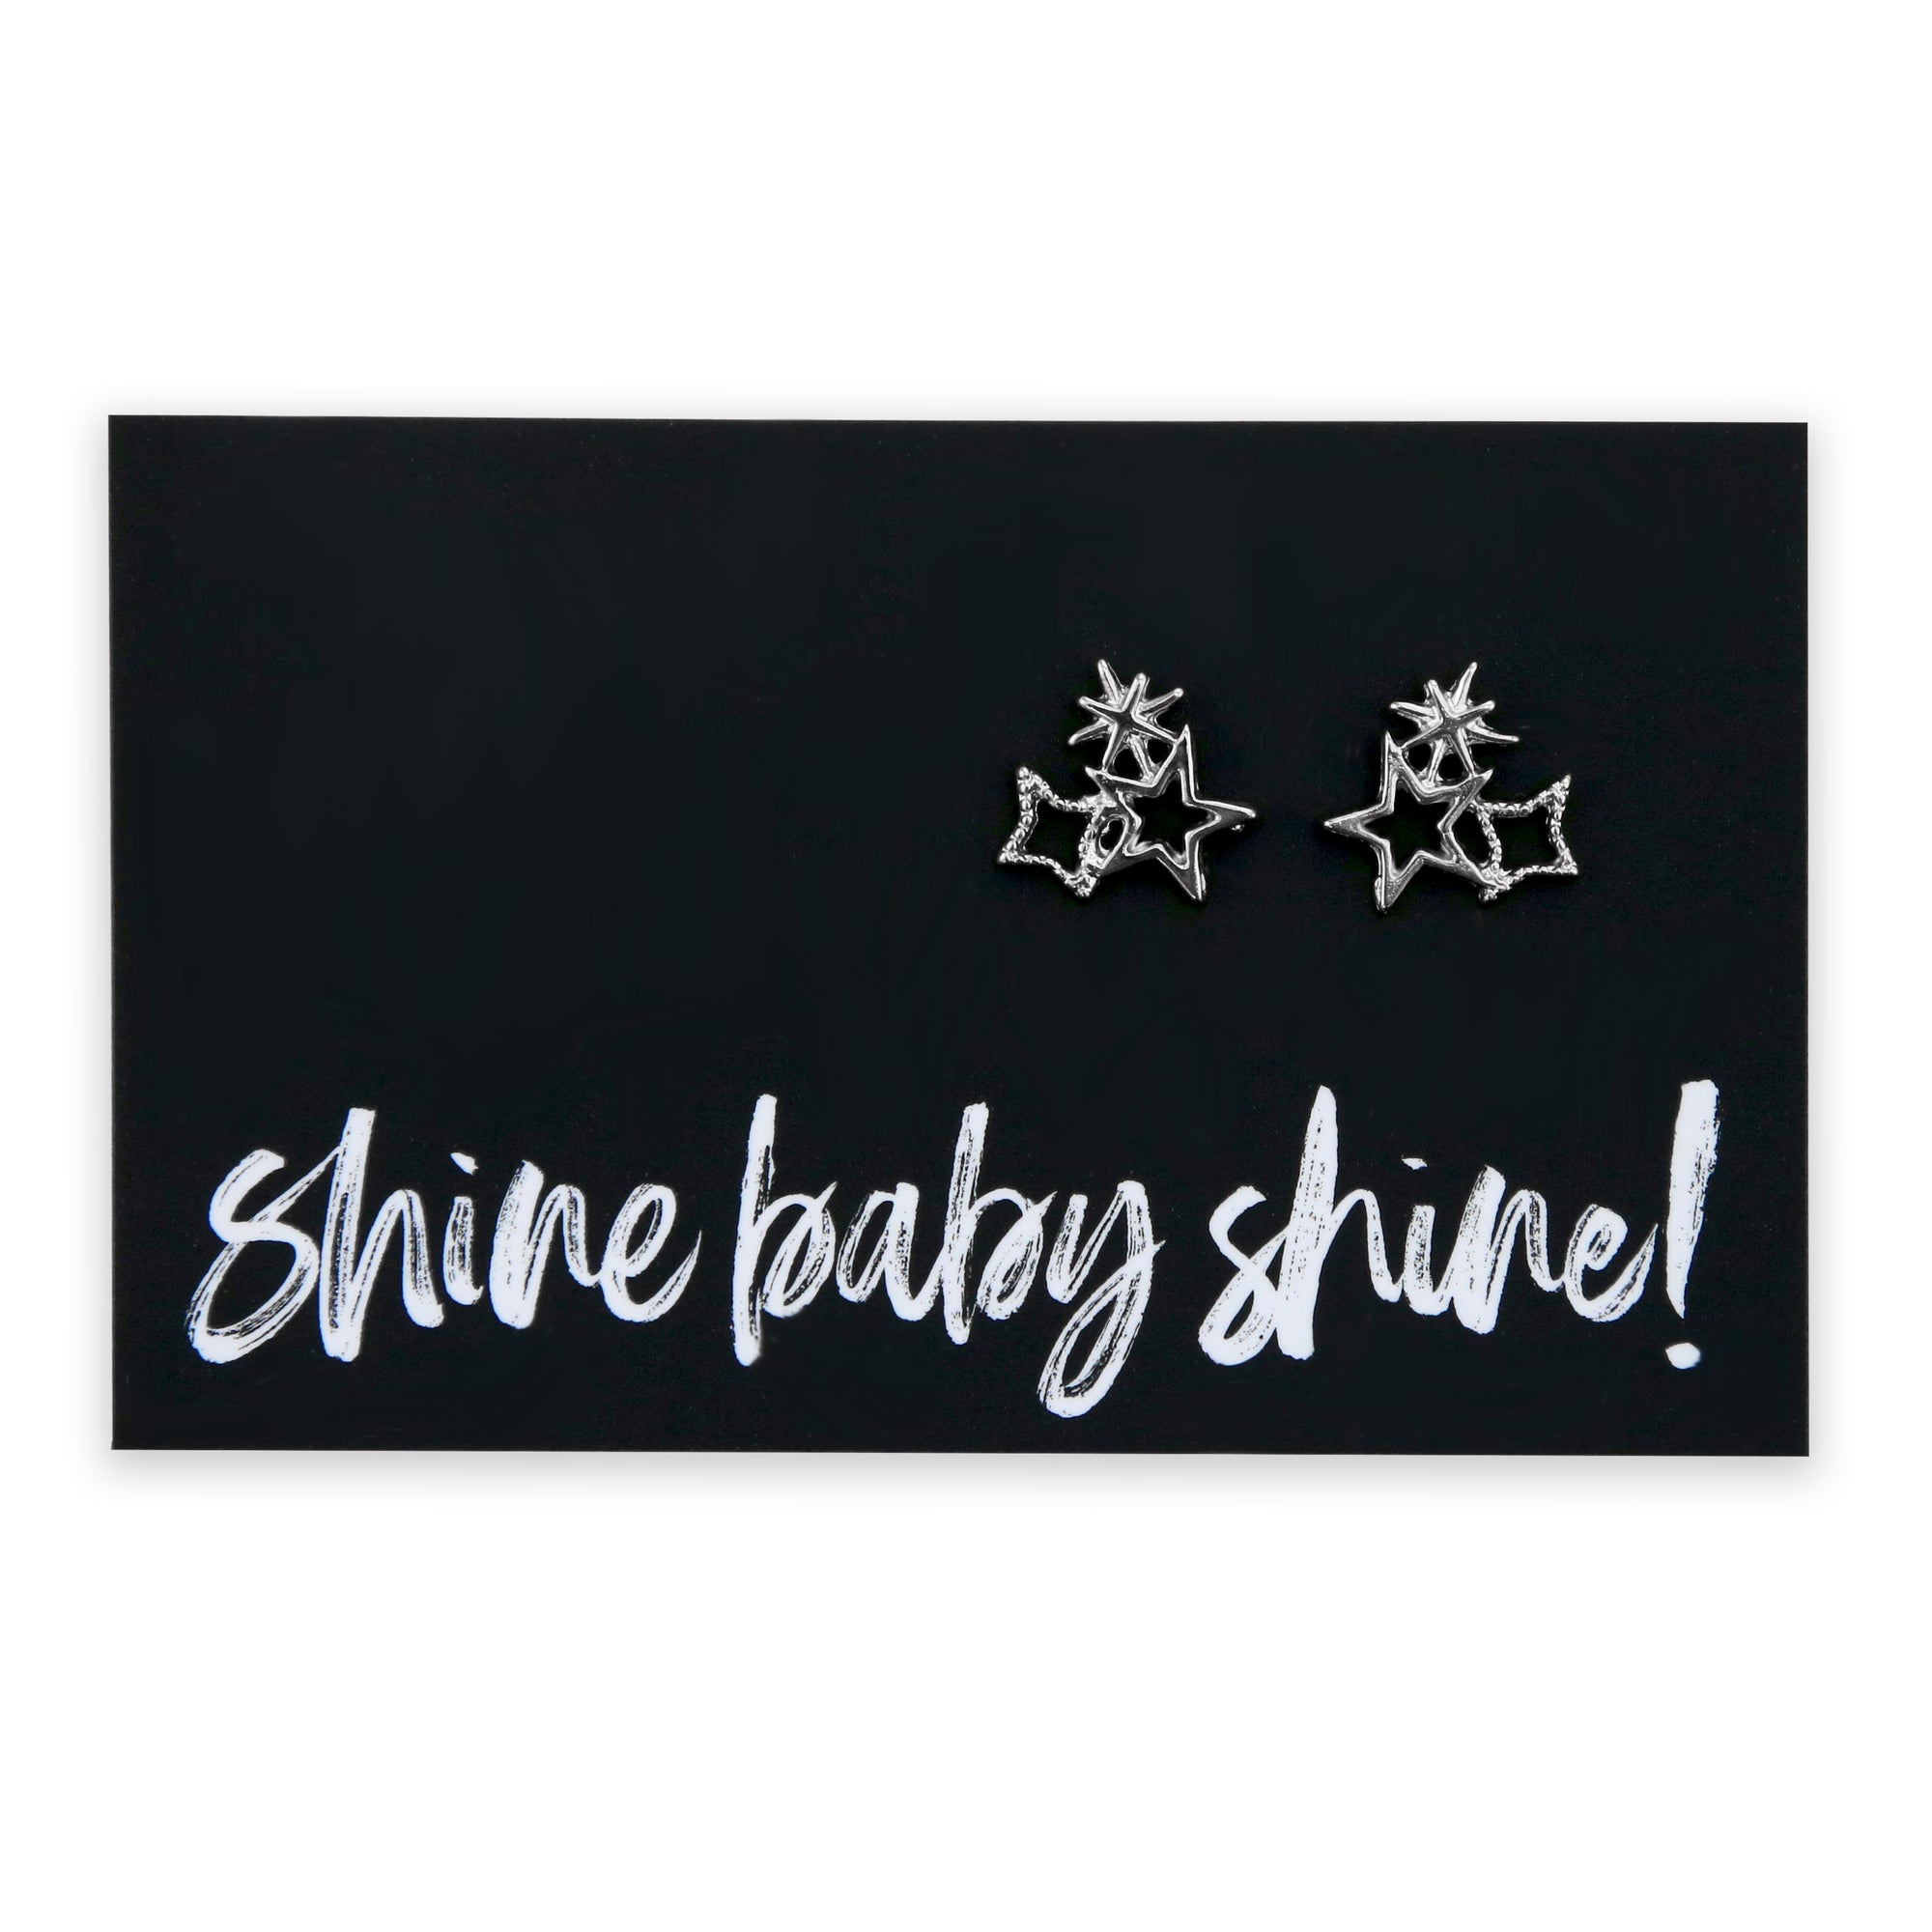 Star cluster silver earring studs on shine baby shine card.